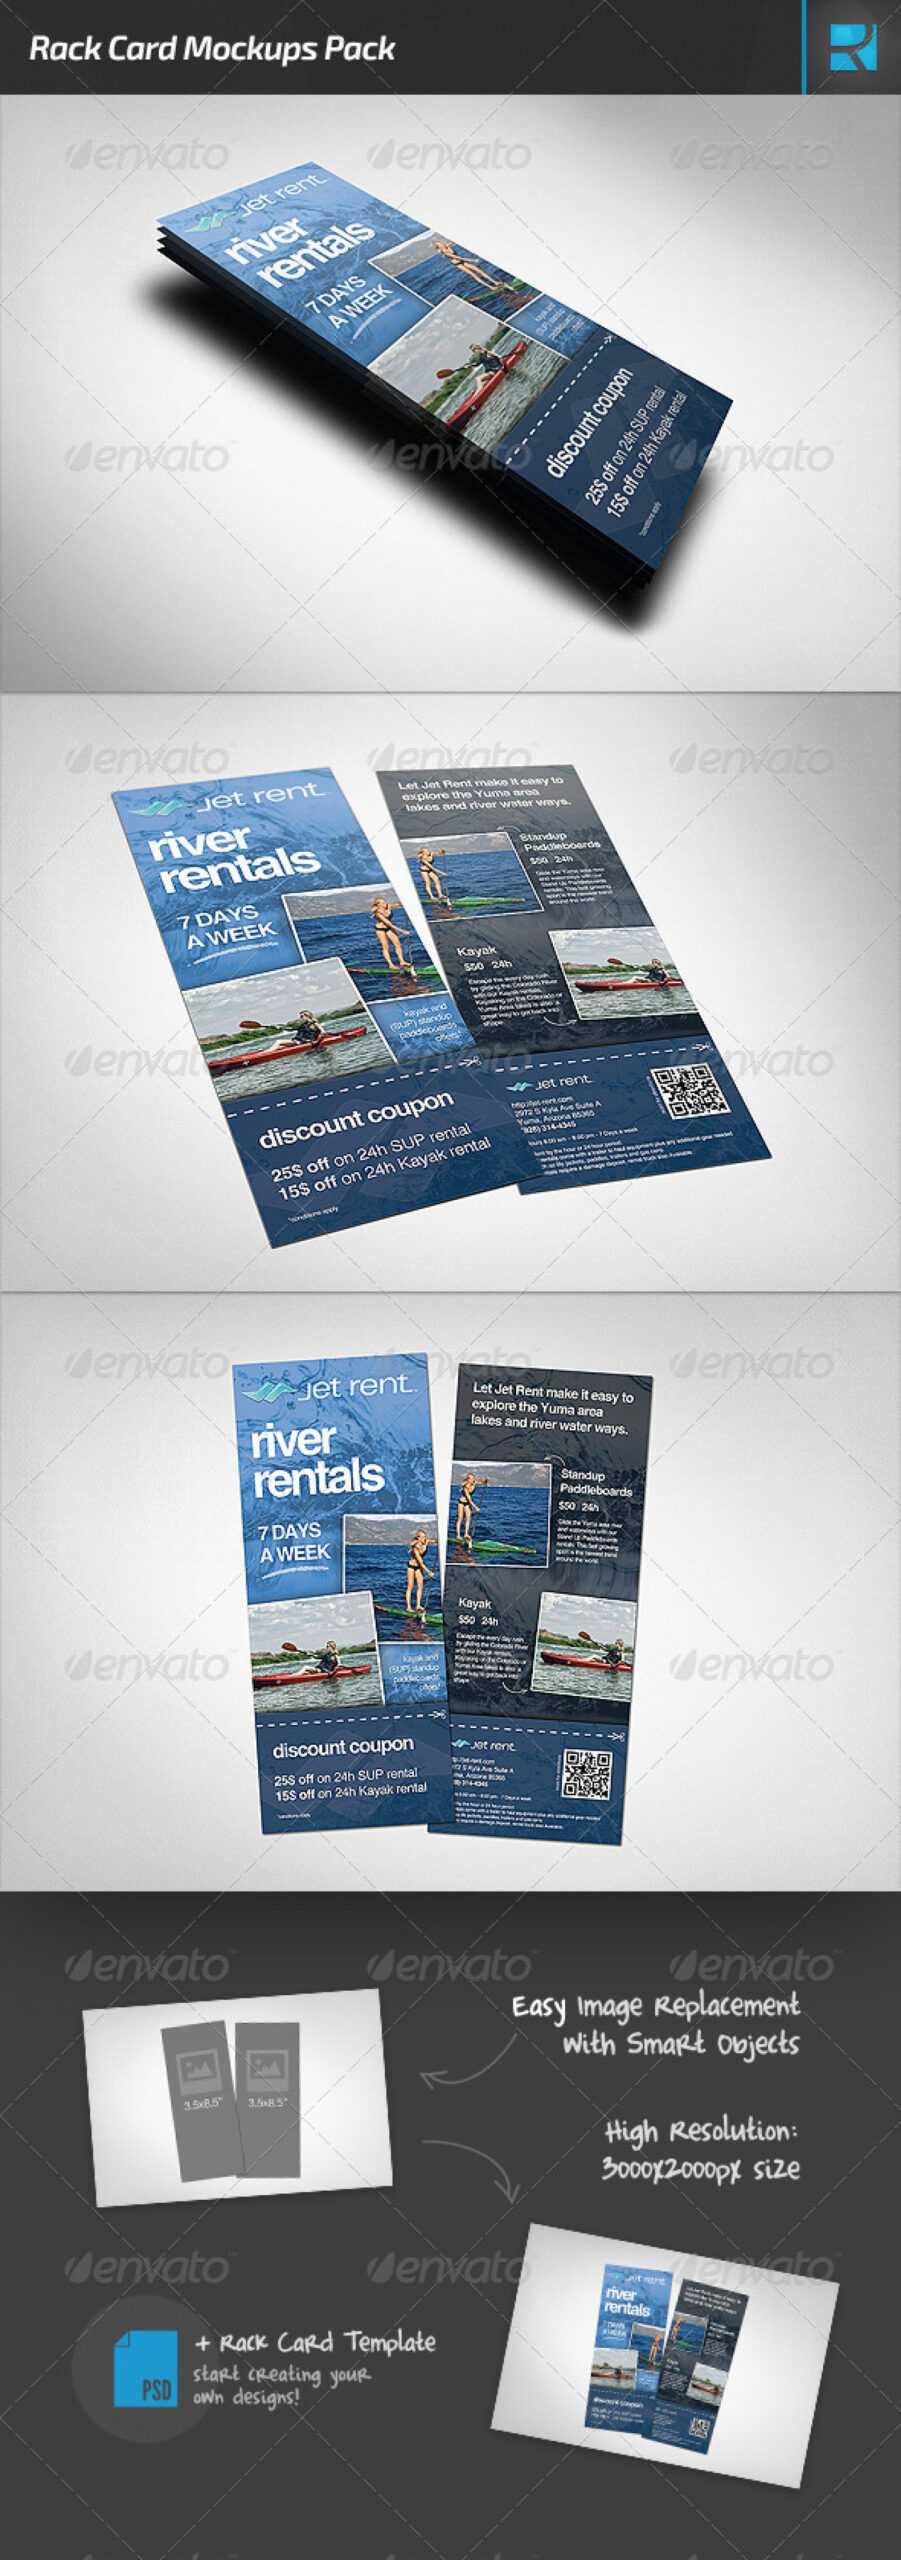 009 Free Rack Card Template Fitness Dl Stunning Ideas Pages Pertaining To Free Rack Card Template Word